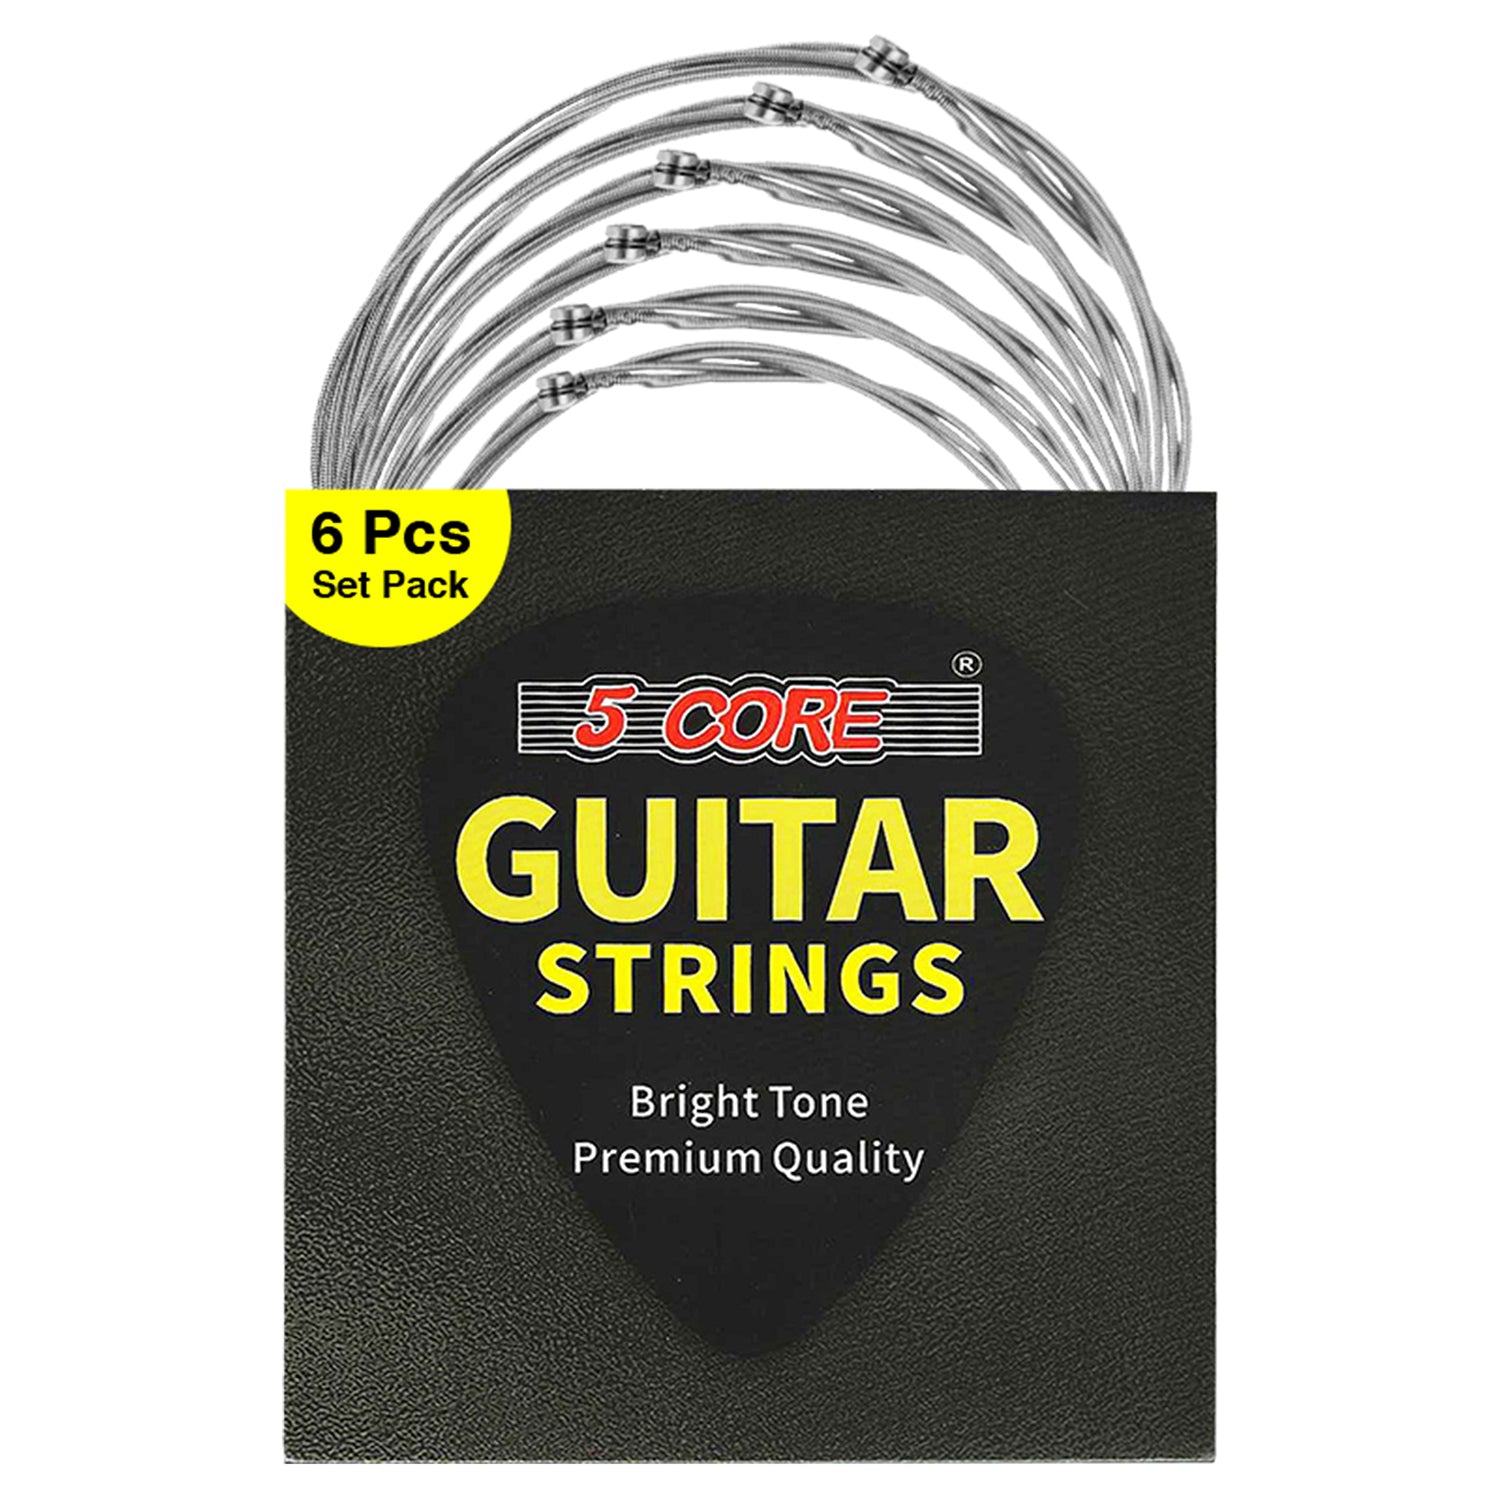 5Core Electric Guitar Strings 0.009-.042 Gauge w Deep Bright Tone for 6 String Guitars